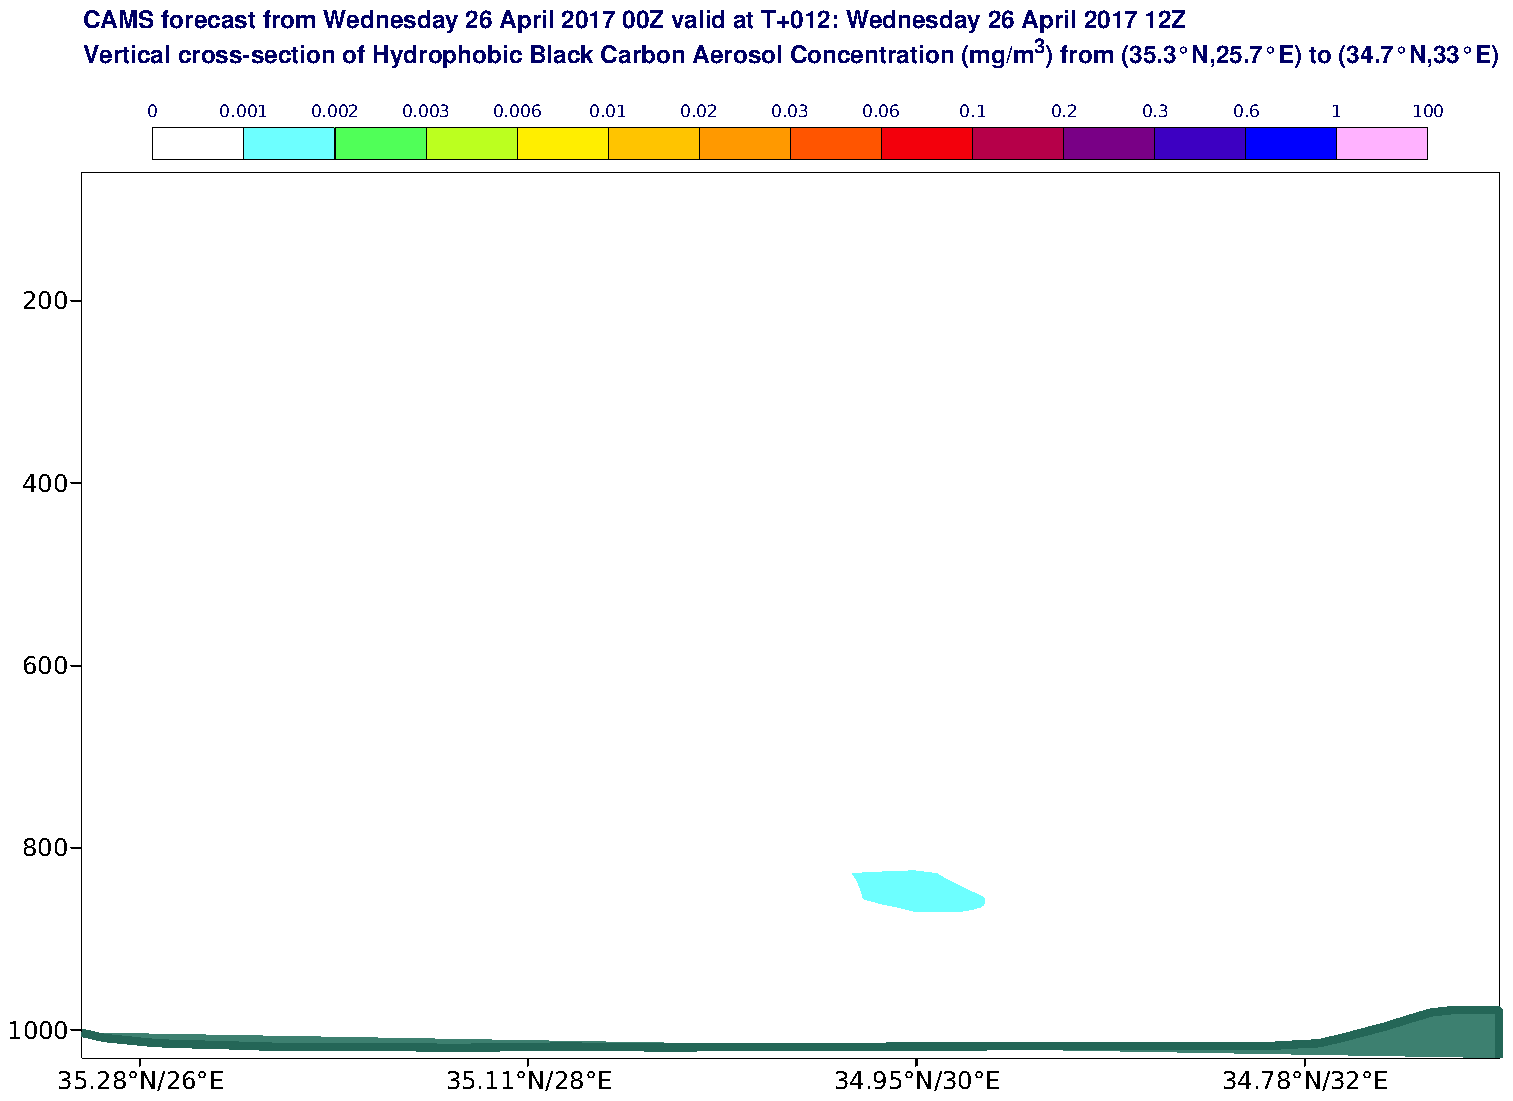 Vertical cross-section of Hydrophobic Black Carbon Aerosol Concentration (mg/m3) valid at T12 - 2017-04-26 12:00